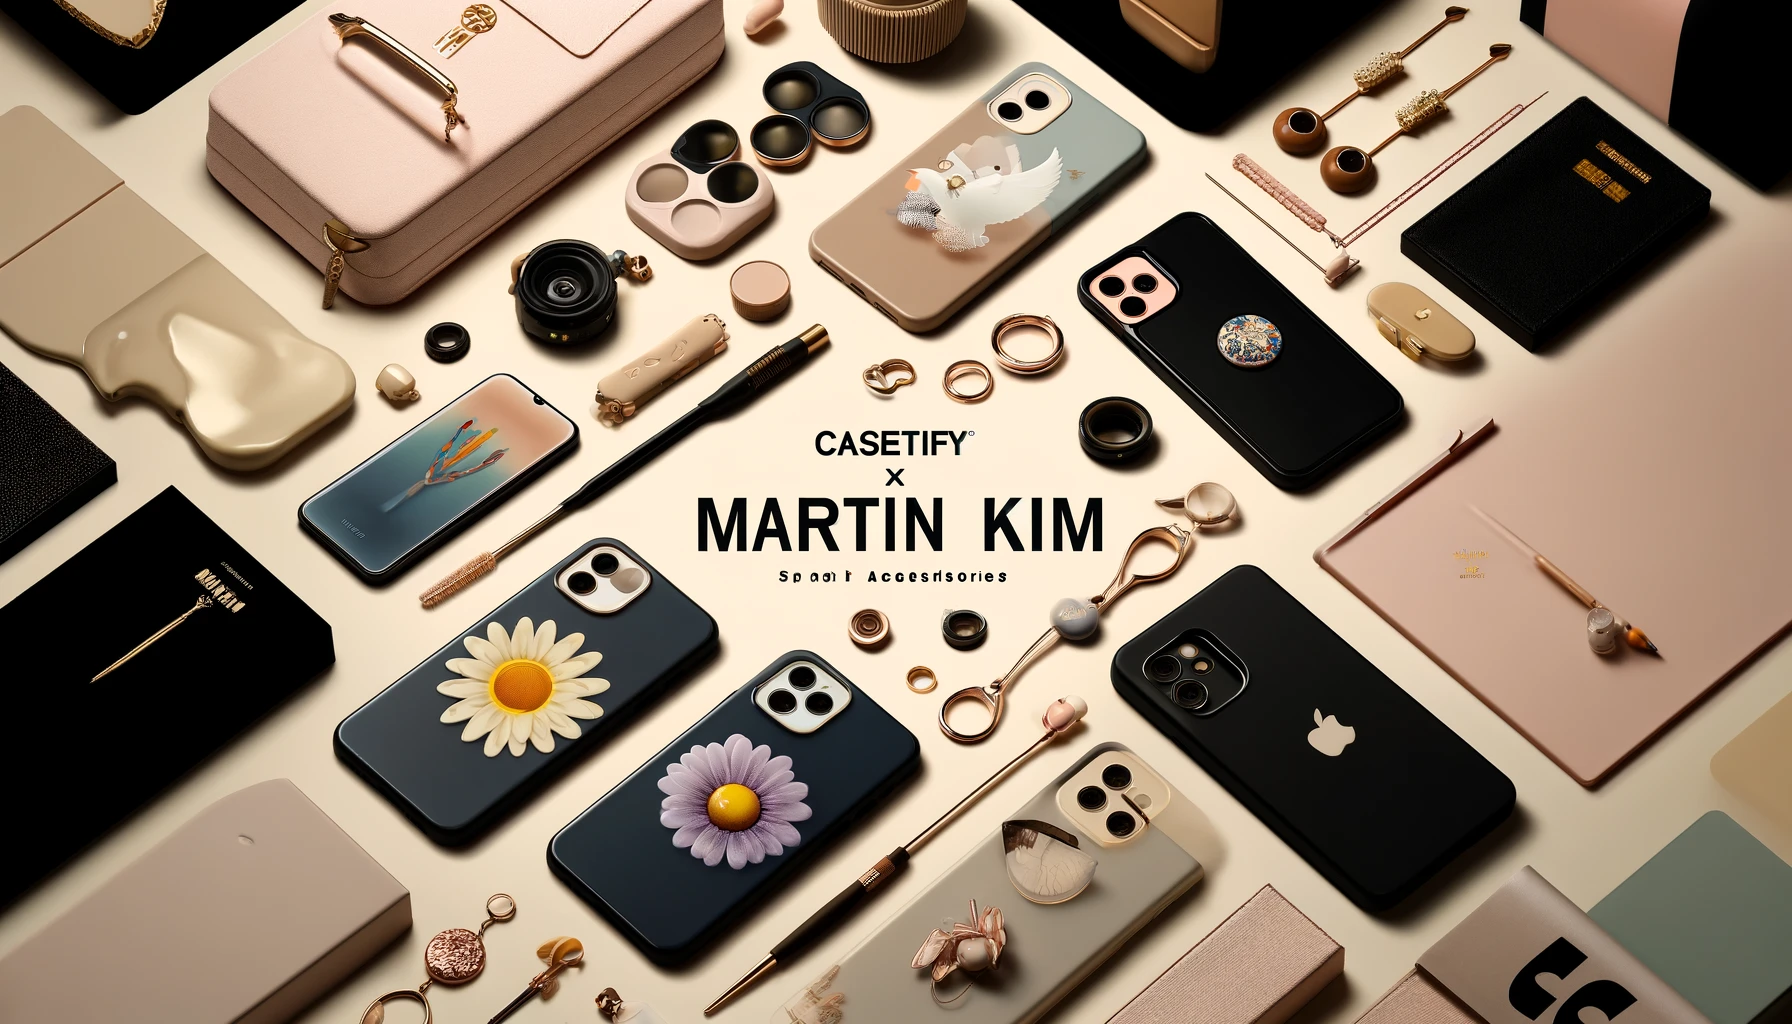 An image showcasing smartphone accessories from the CASETiFY x MartinKim collaboration. Include a variety of accessories with stylish and trendy designs. Include the text 'CASETiFY x MartinKim' prominently in the image.